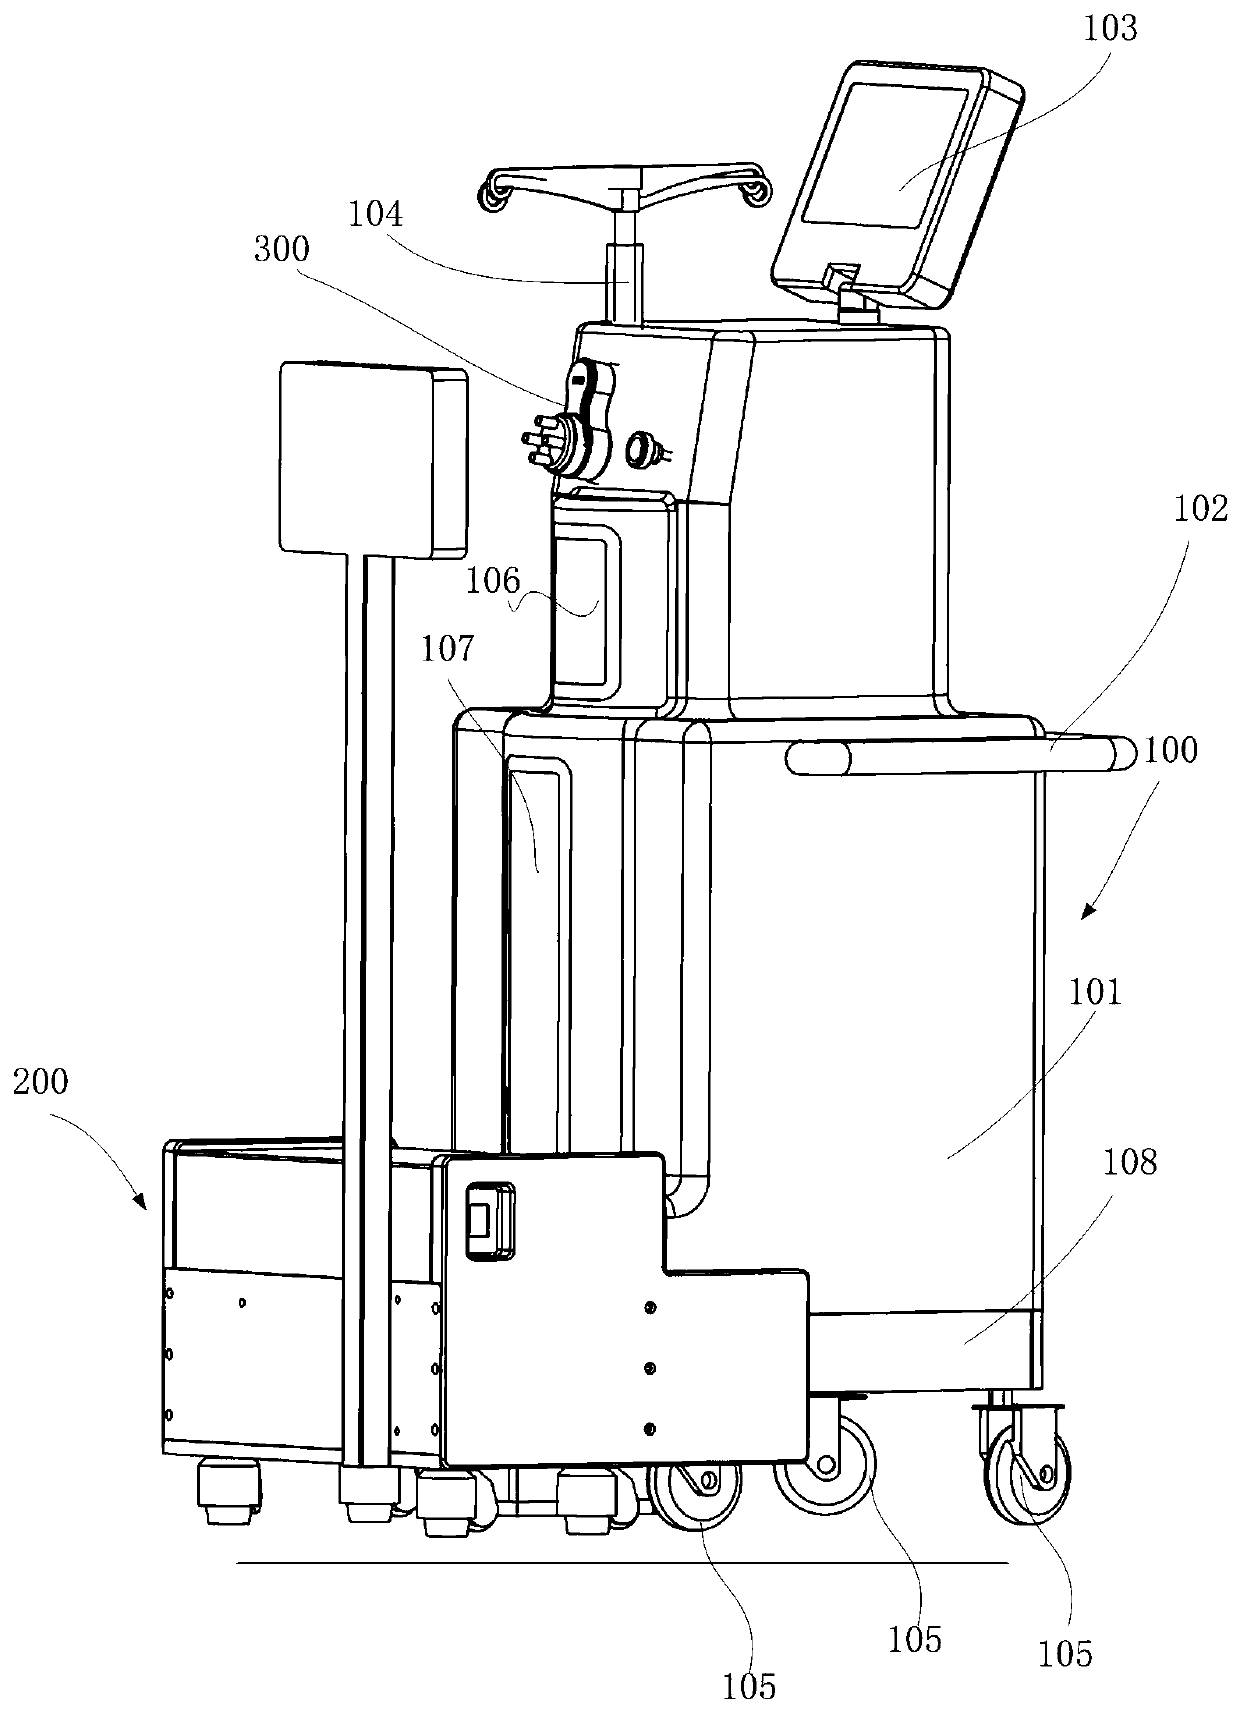 Waste collecting equipment and waste collecting and treatment system